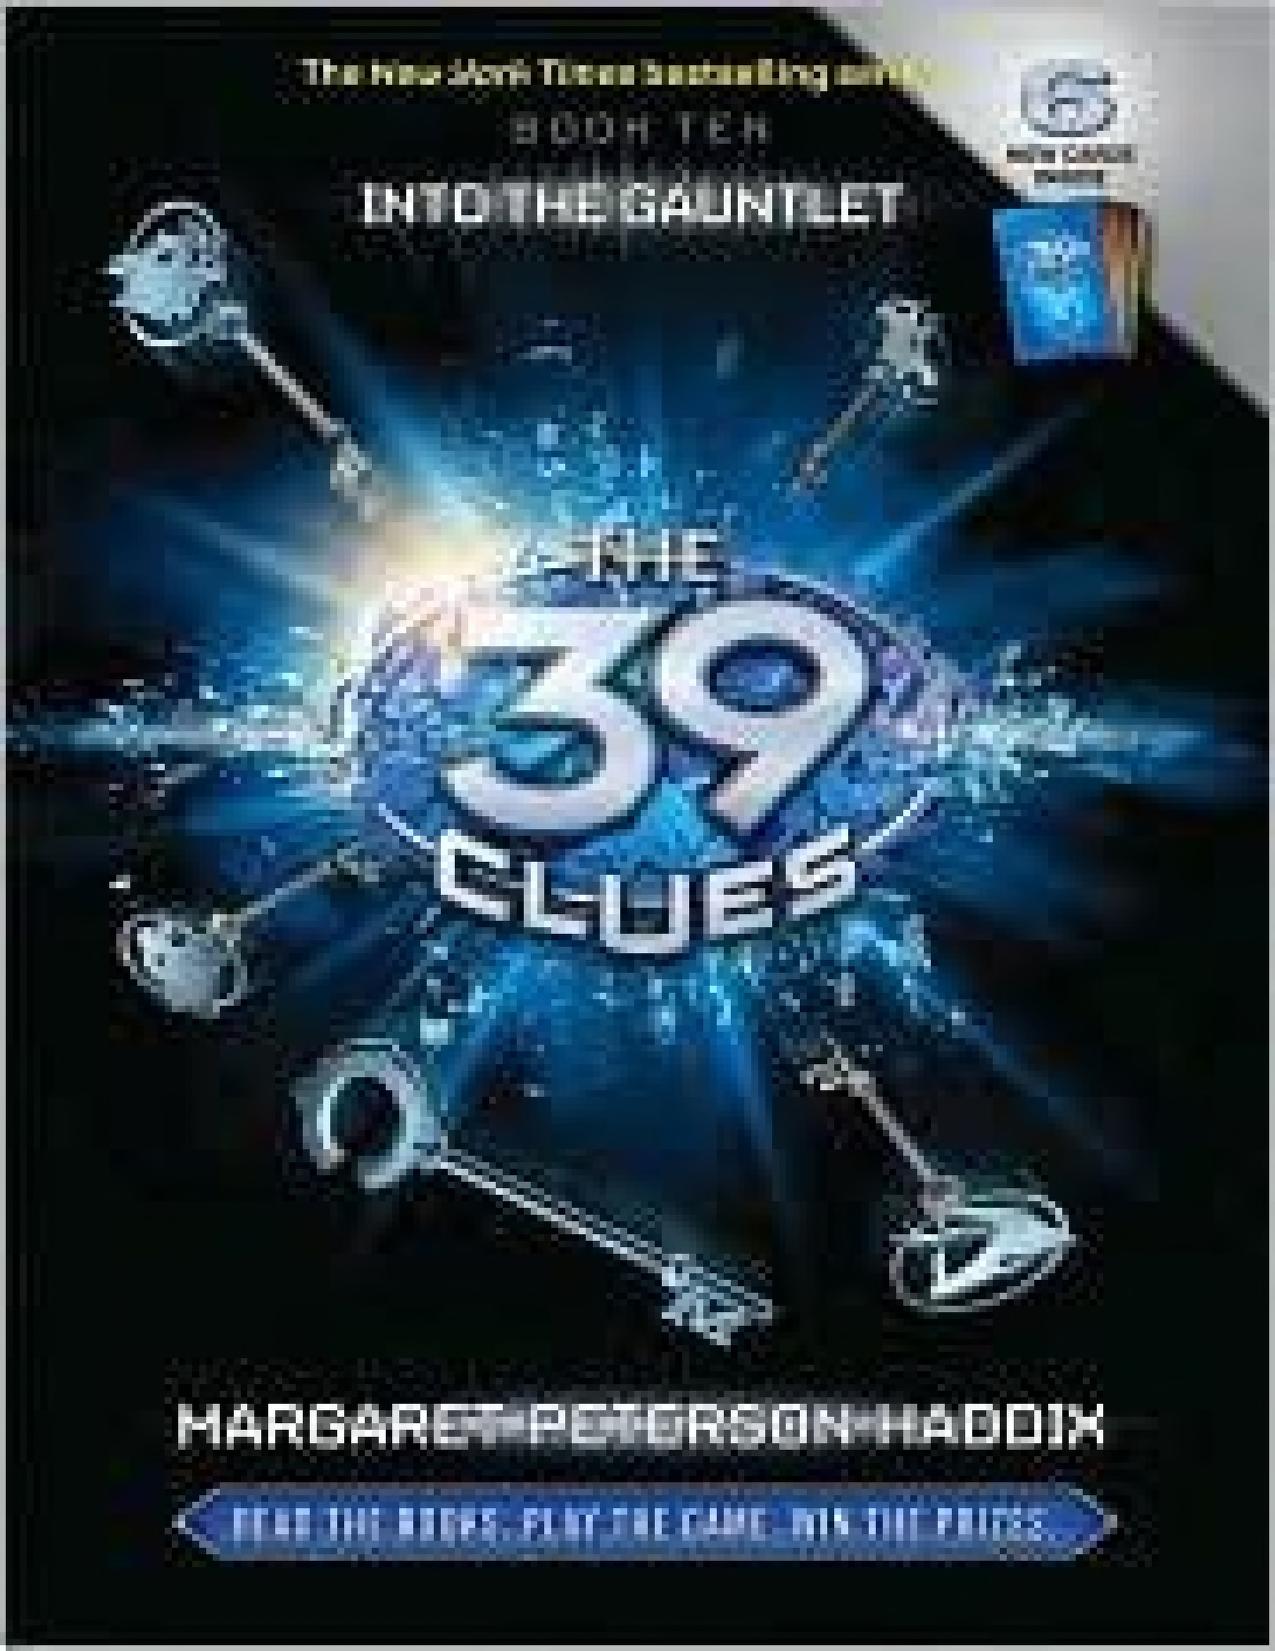 39 clues in too deep pdf free download